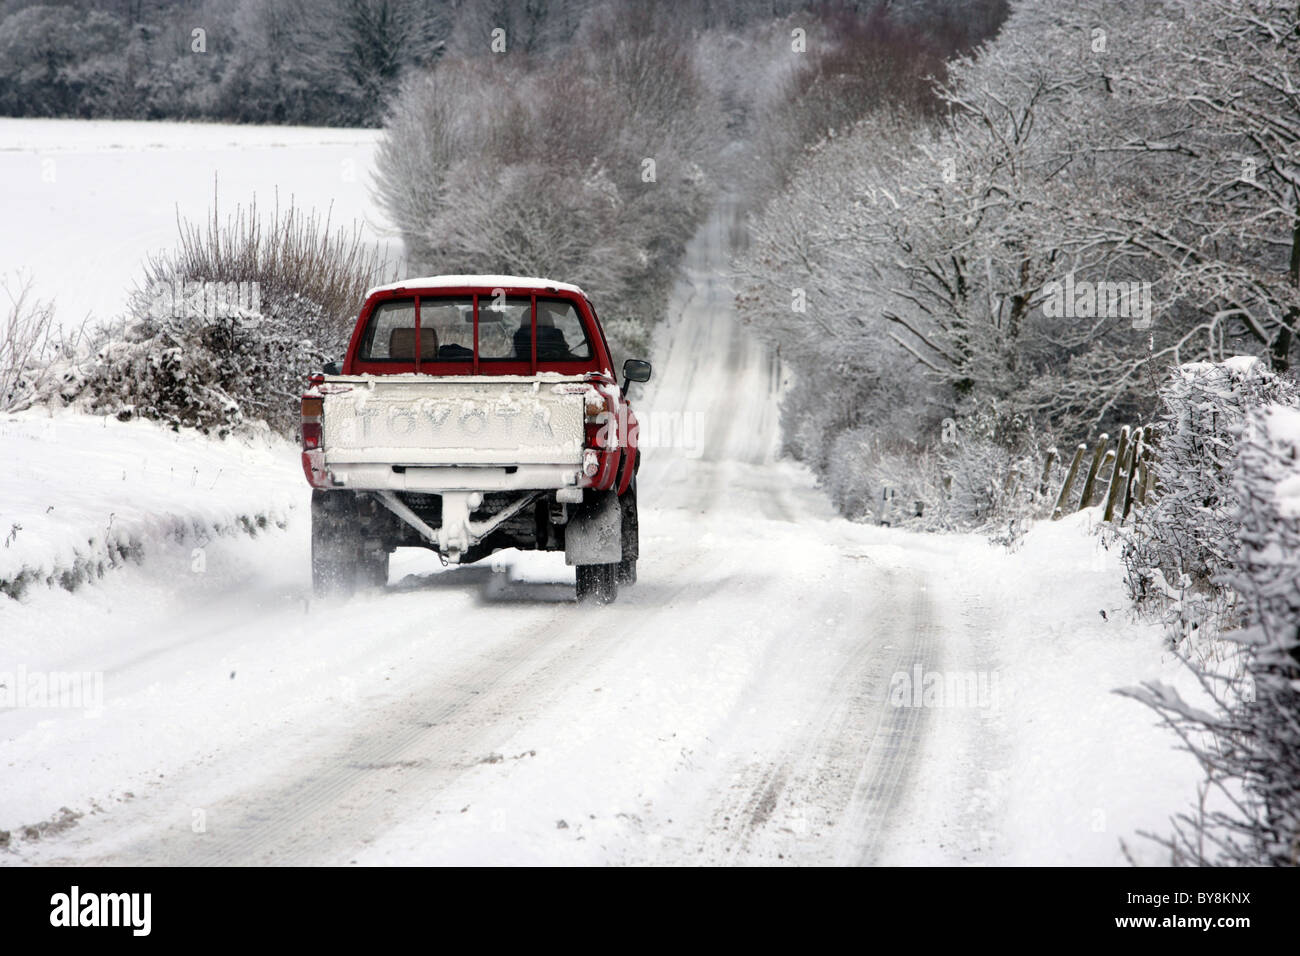 An old red Toyota pick up truck cautiously drives through the snow during a cold winter in England. 2010. Stock Photo